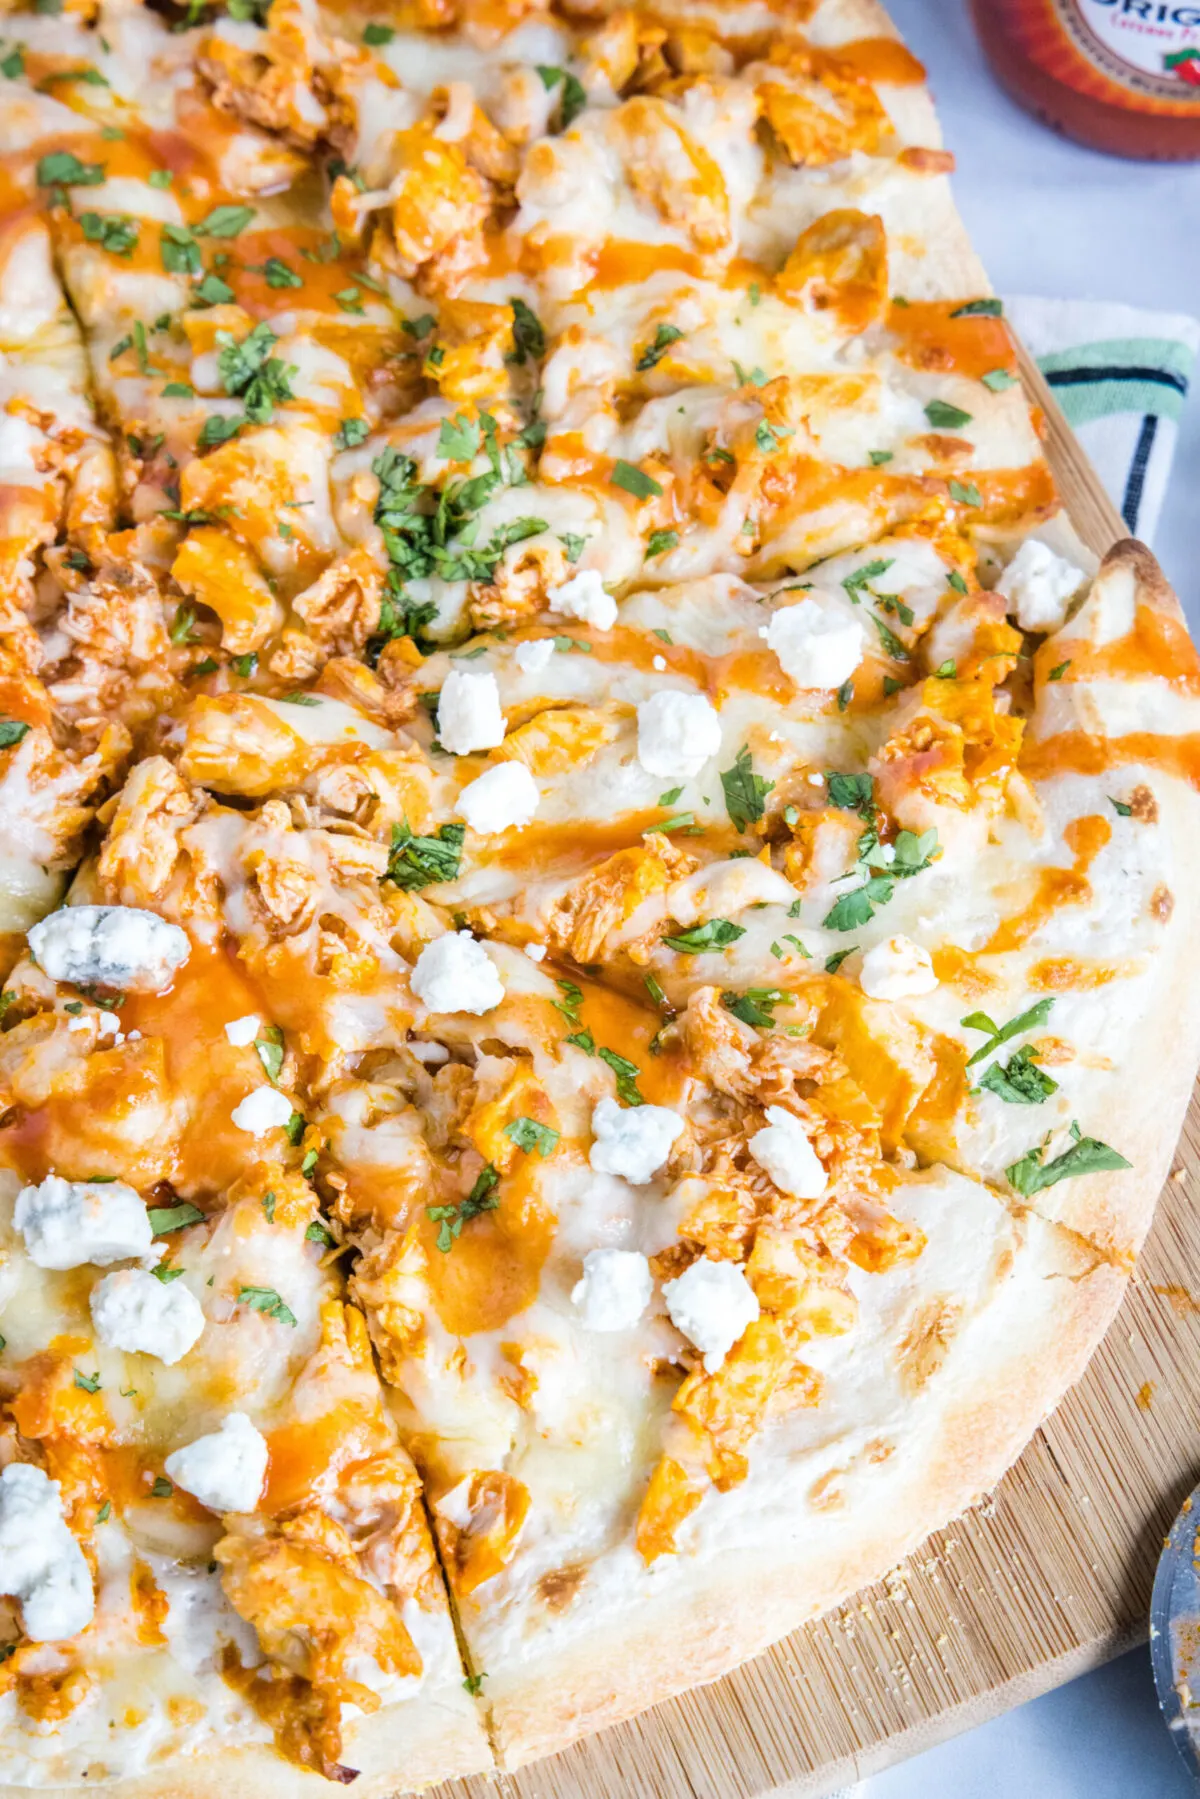 Overhead view of buffalo chicken pizza topped with blue cheese and parsley, cut into slices